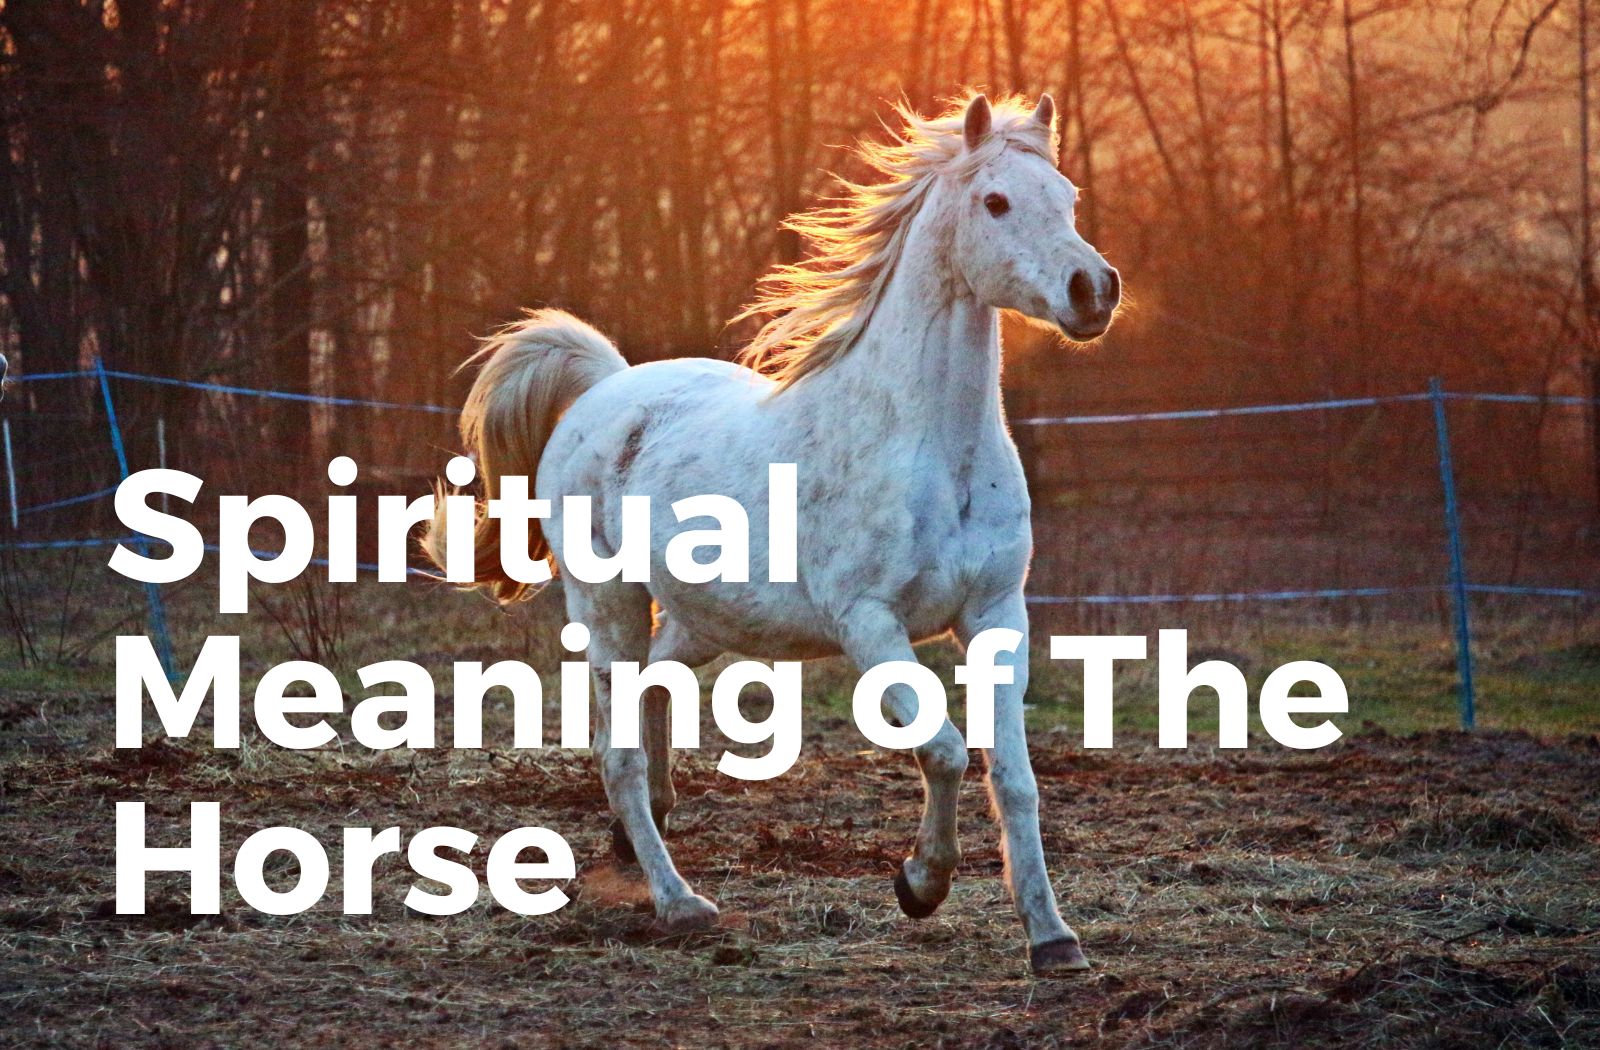 Spiritual Meaning of Horse